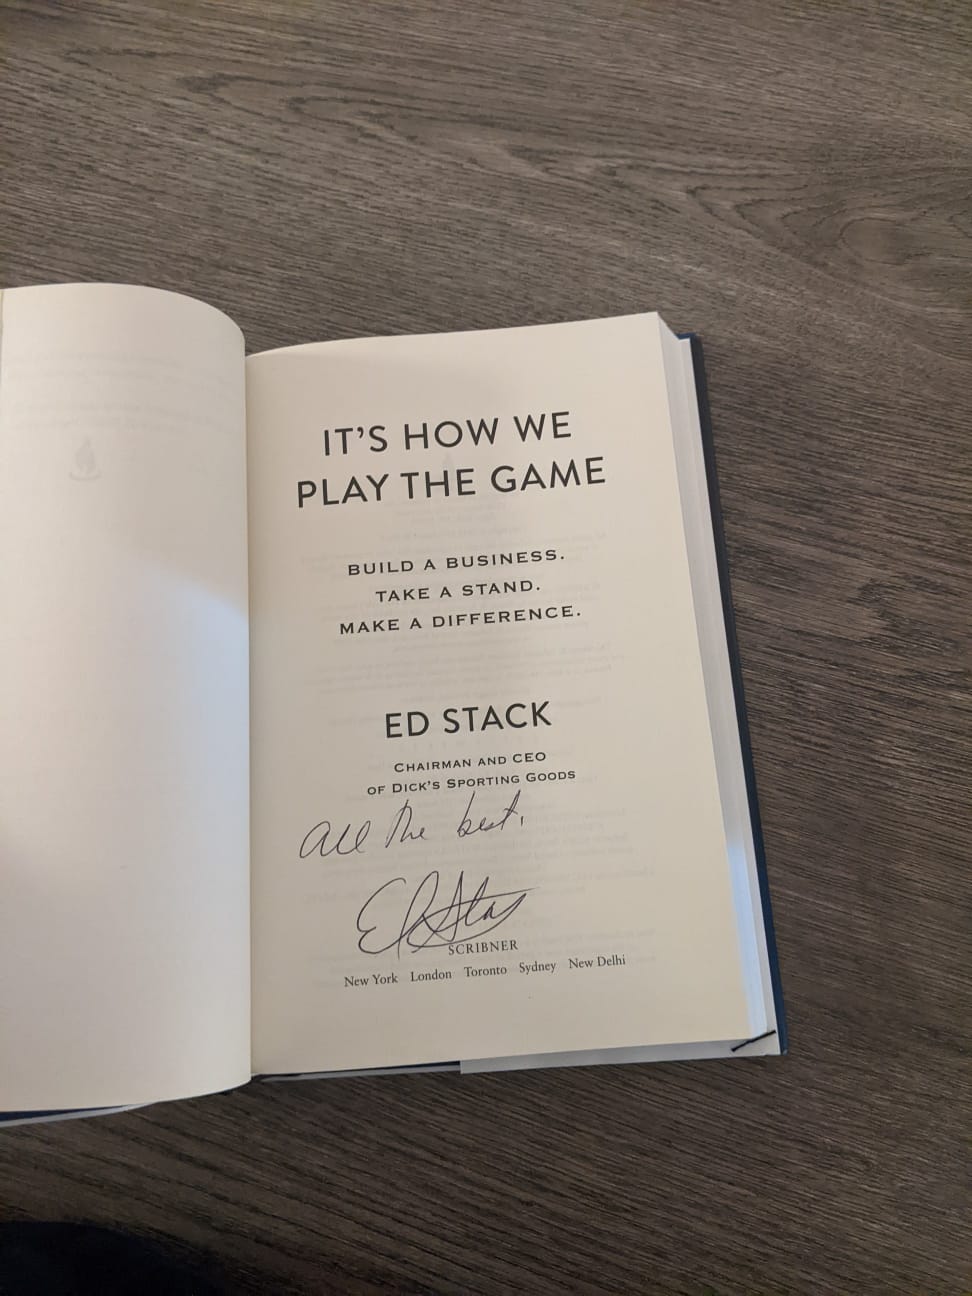 An autographed copy of "It's How We Play the Game" from Ed Stack, Chairman and CEO of Dick's Sporting Goods